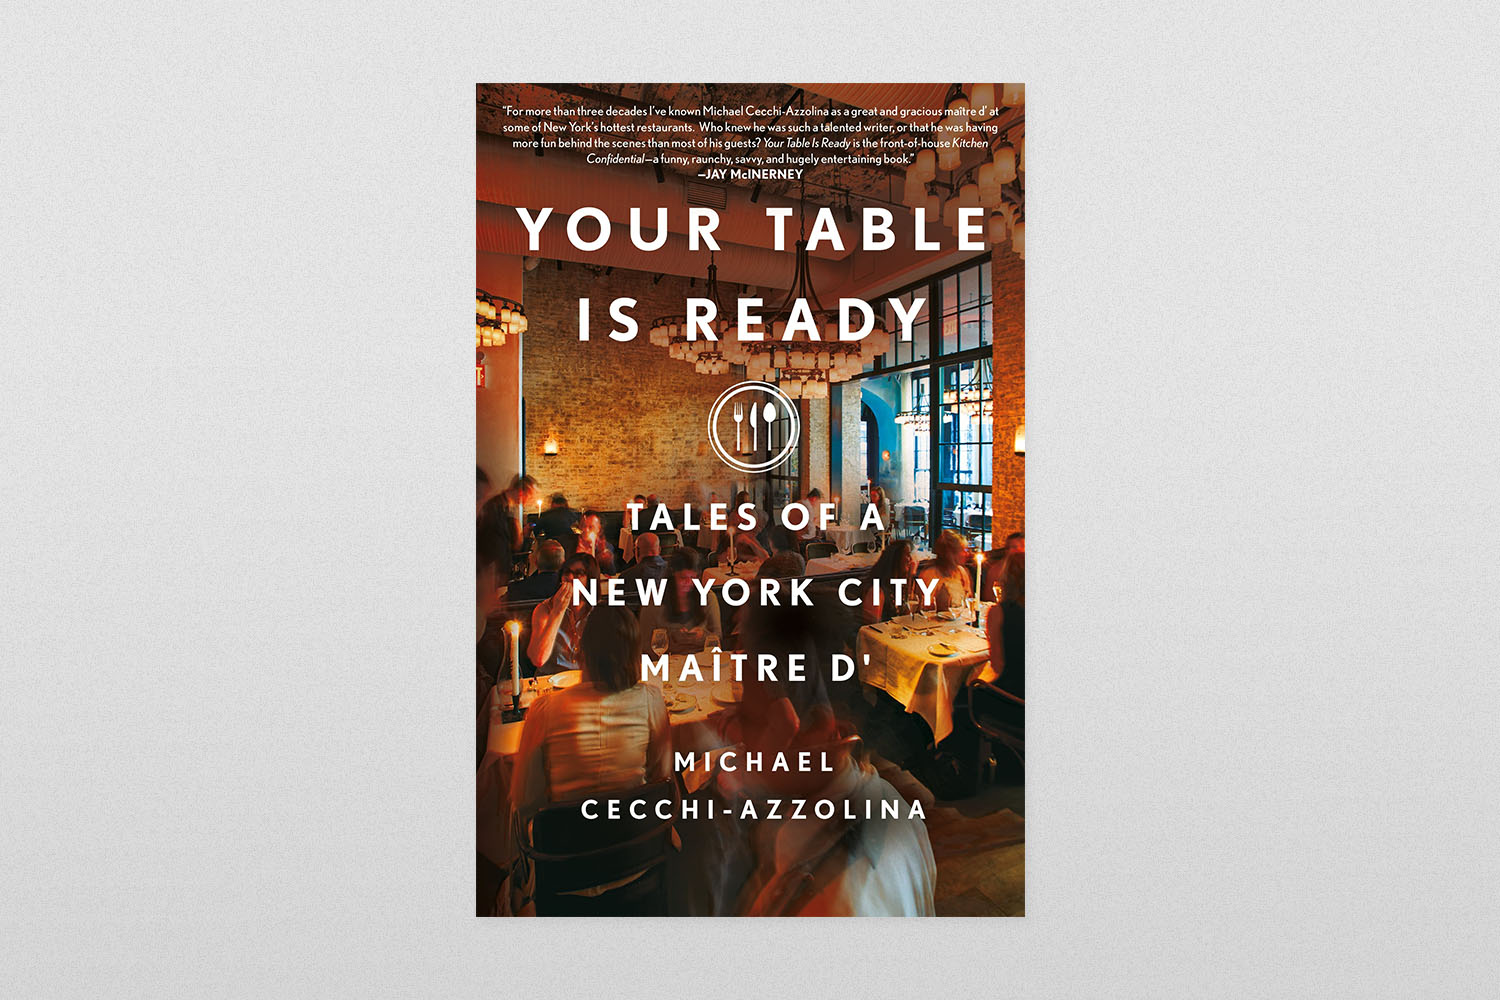 Your Table Is Ready by Michael Cecchi-Azzolina